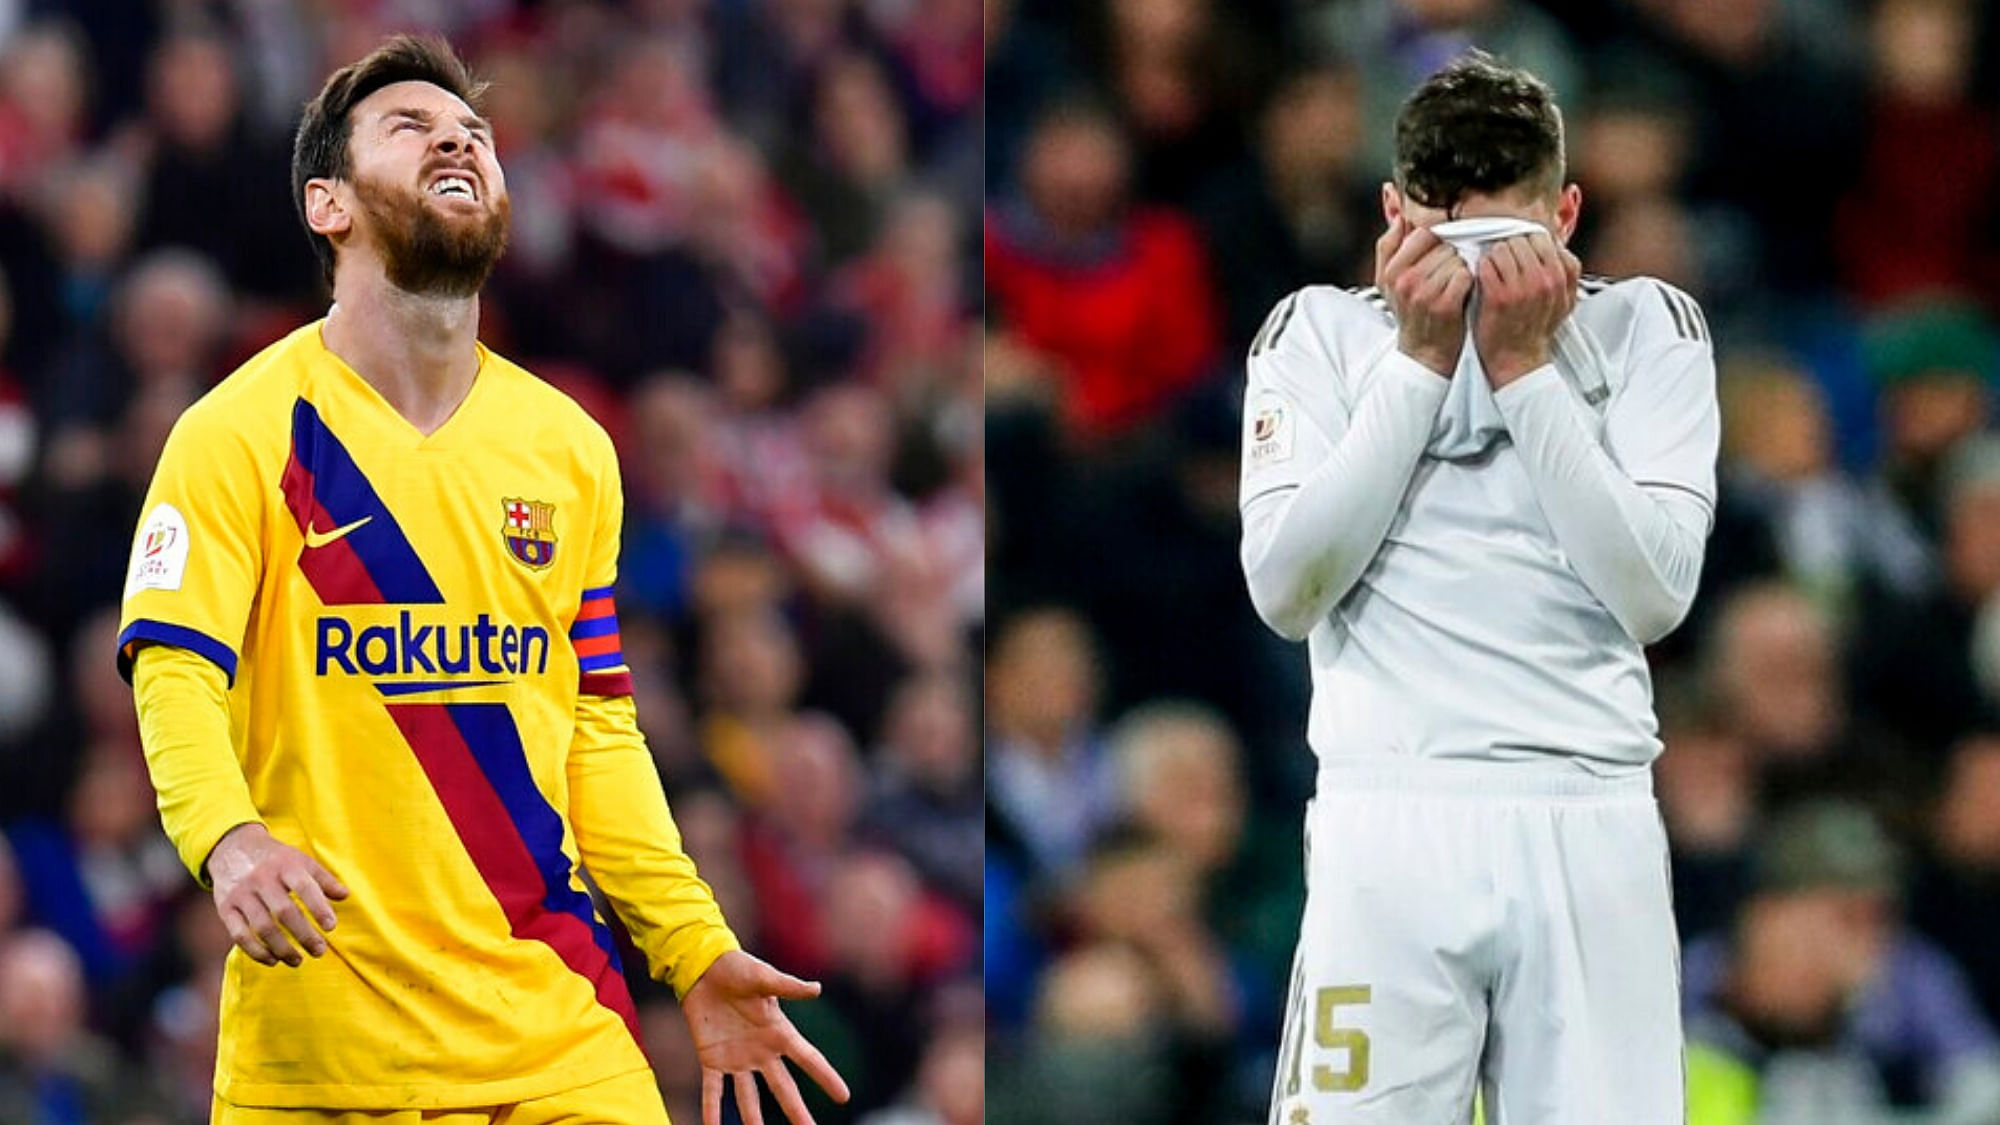 It’s the first time in a decade that neither Real Madrid nor Barcelona made it to the last four in the Copa del Rey.